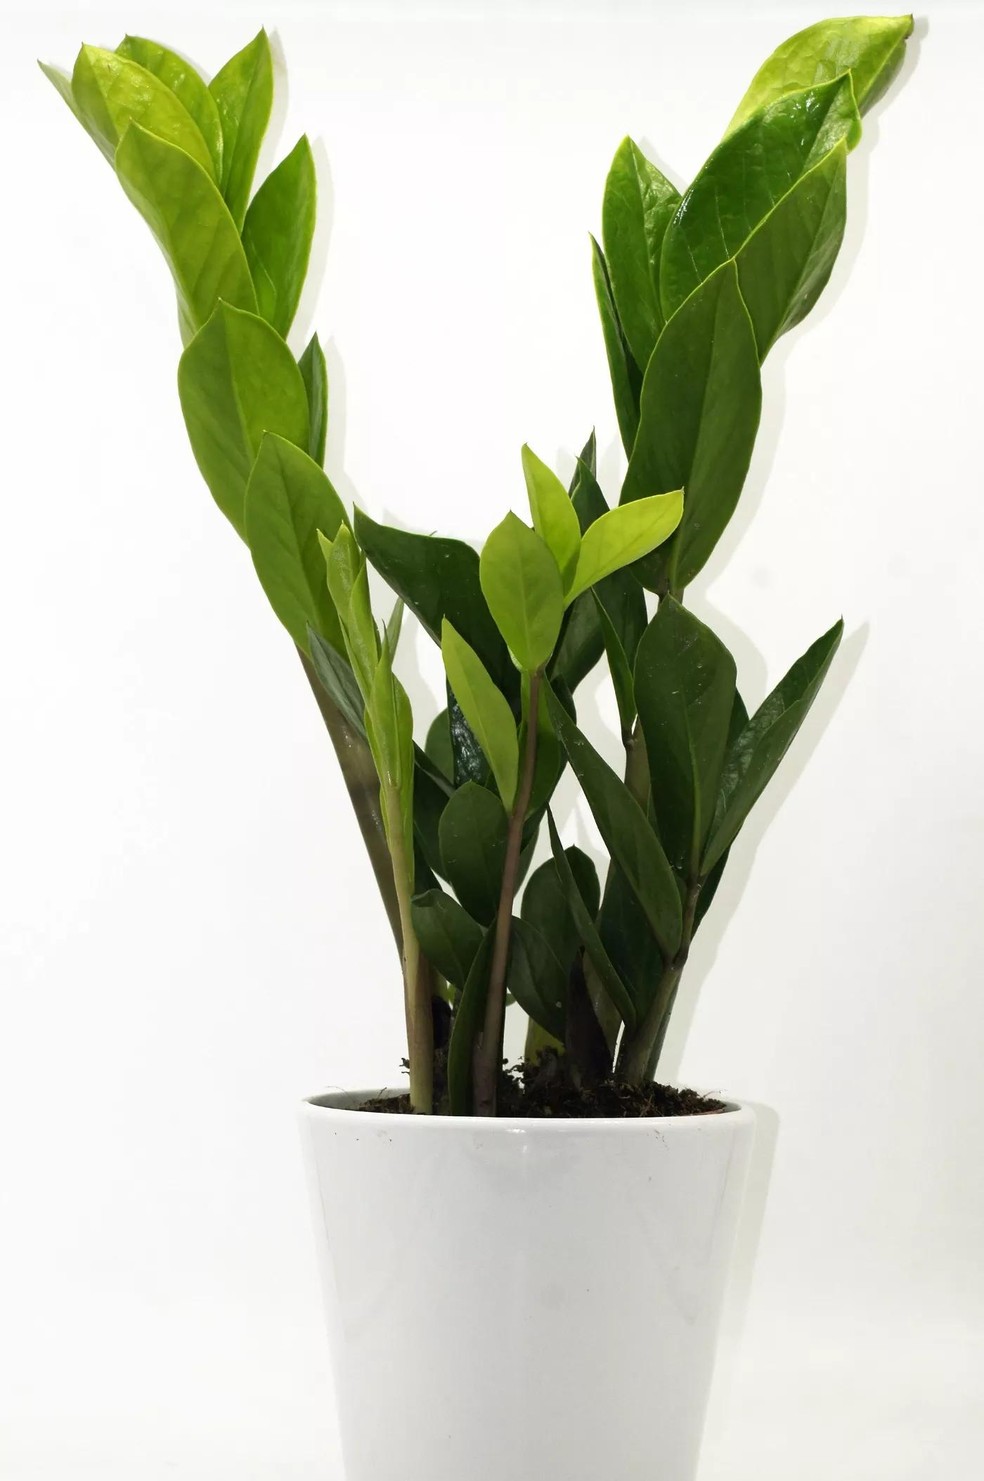 Lucky feather Zamioculca's plant in pot exposed on white background (Foto: Getty Images/iStockphoto) — Foto: Casa Vogue